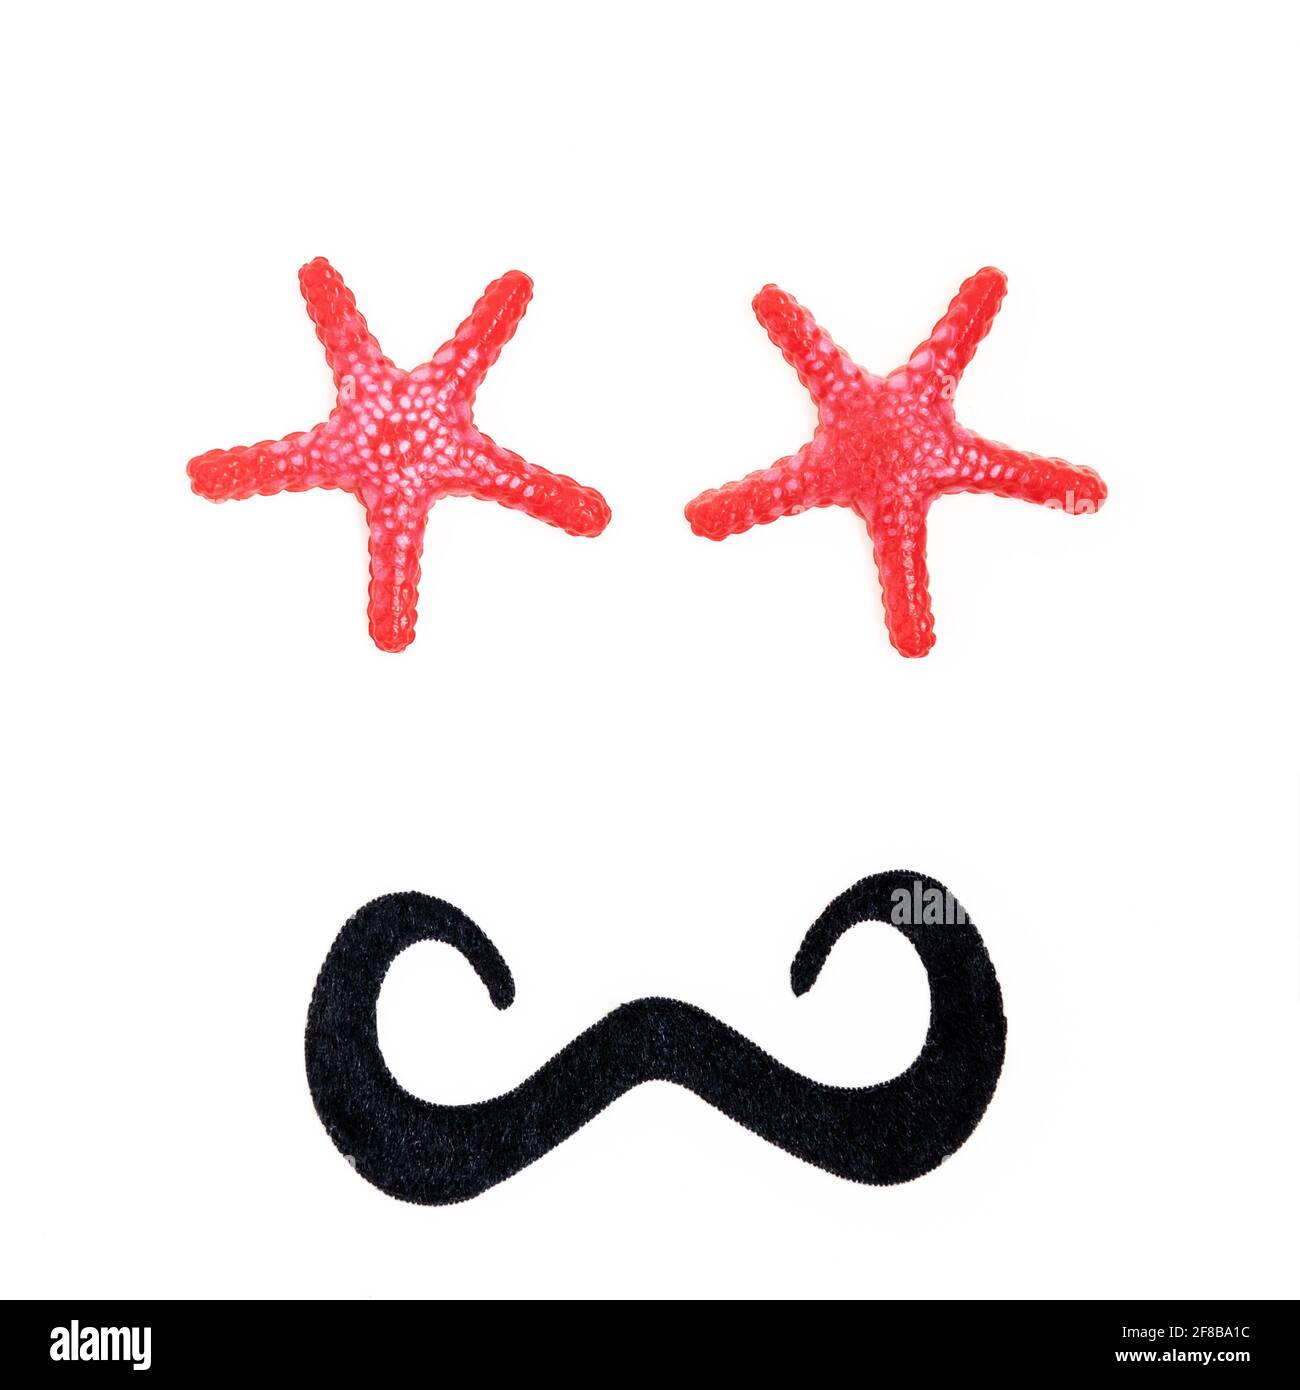 Male anthropomorphic face, with starfish eyes and black mustache Stock Photo